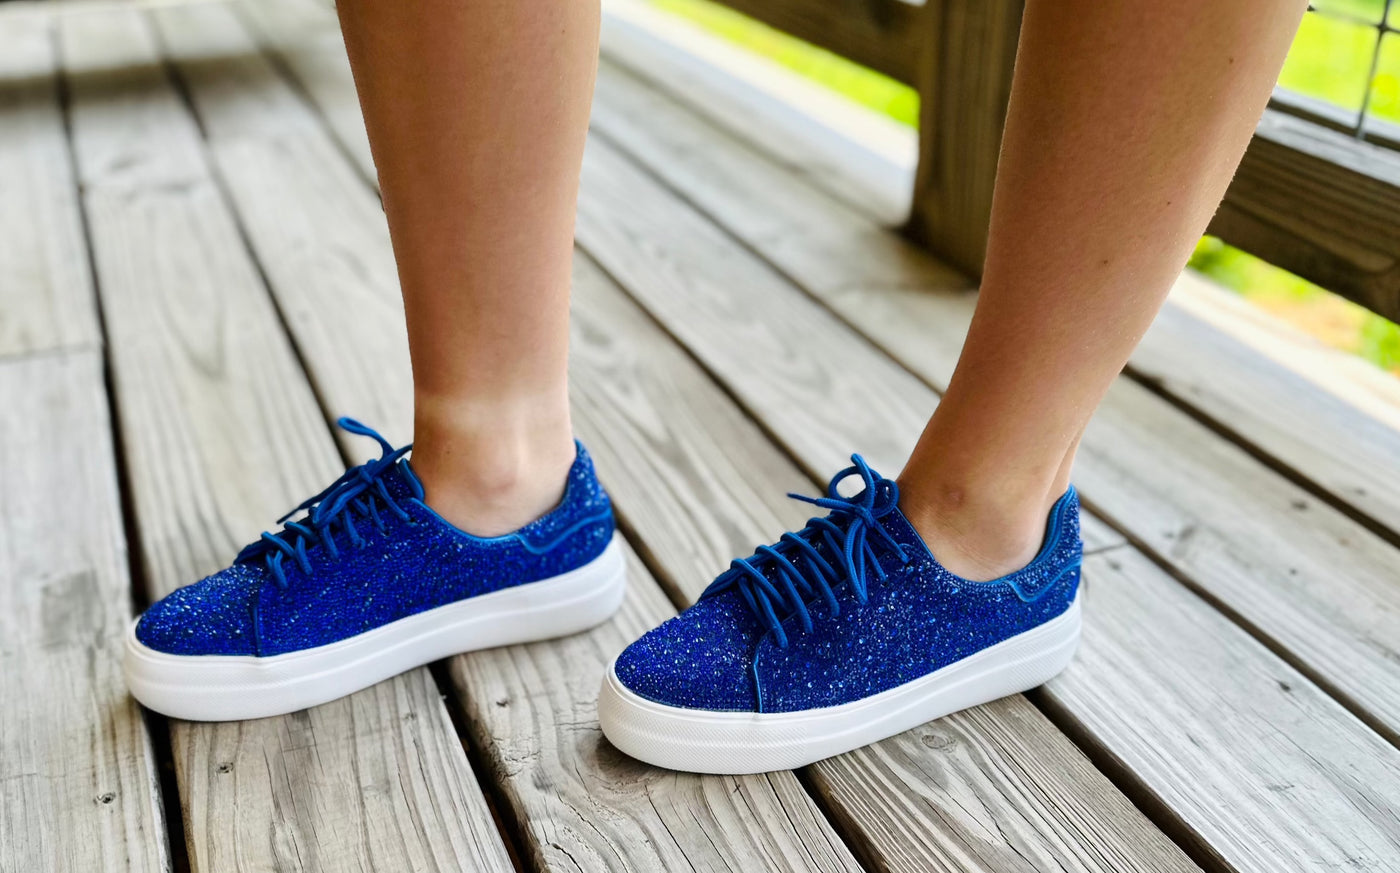 Corkys "Bedazzle" Sneakers in Royal Blue